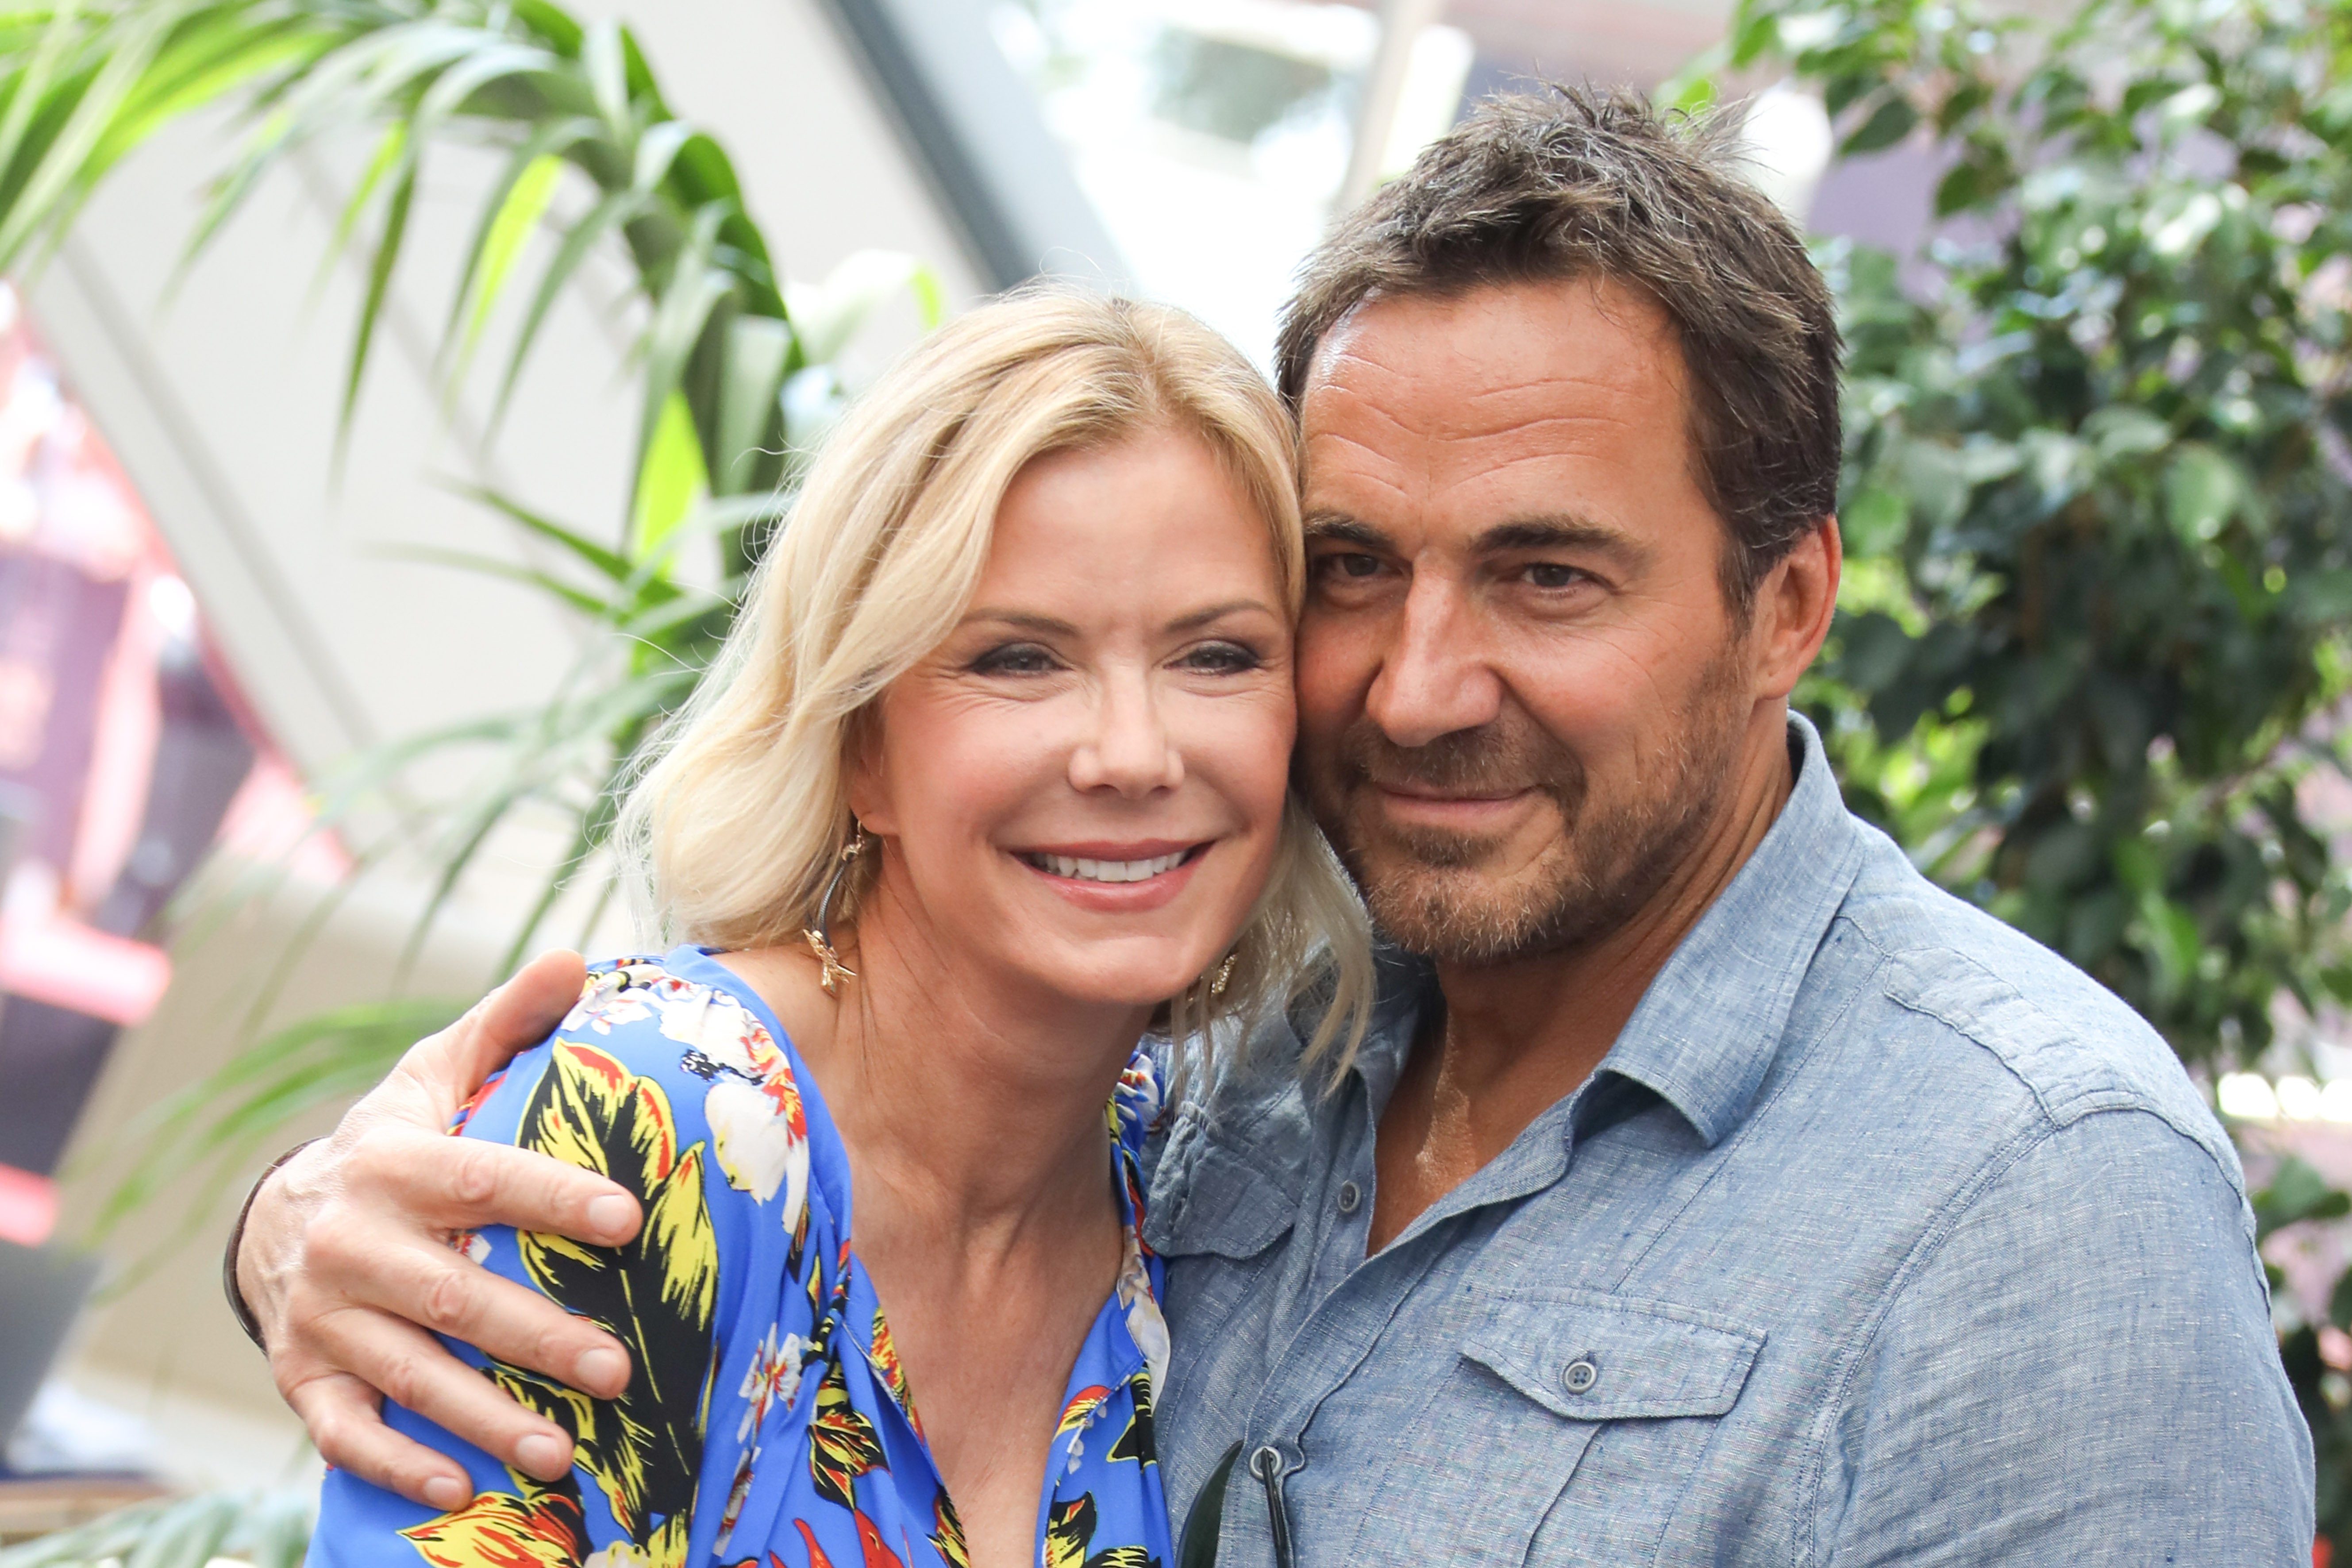 'The Bold and the Beautiful' actor Katherine Kelly Lang in a blue floral dress, and Thorsten Kaye in a blue shirt pose for a photo.